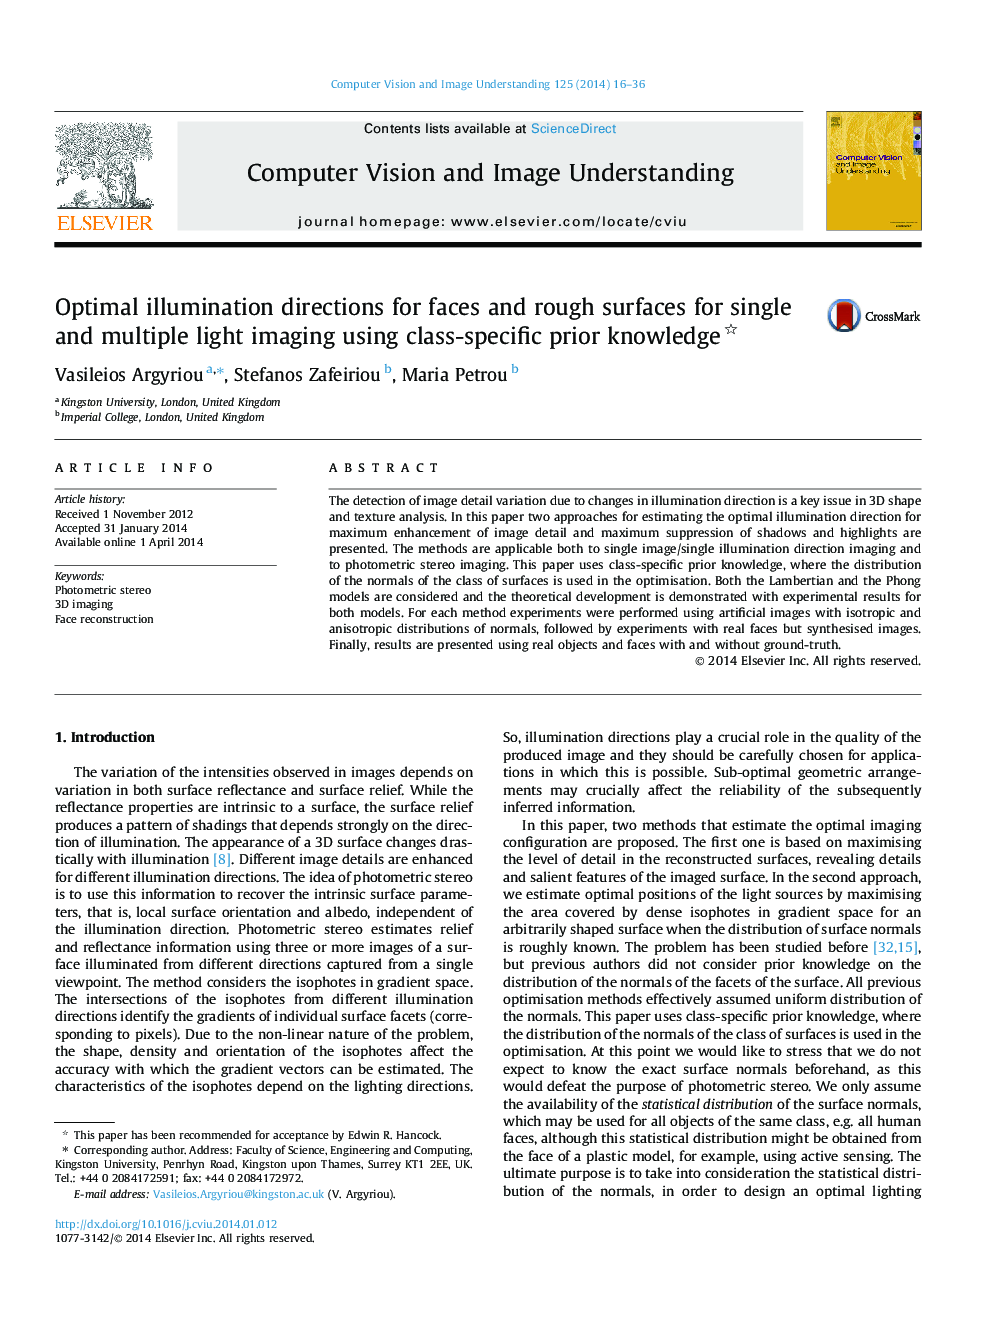 Optimal illumination directions for faces and rough surfaces for single and multiple light imaging using class-specific prior knowledge 